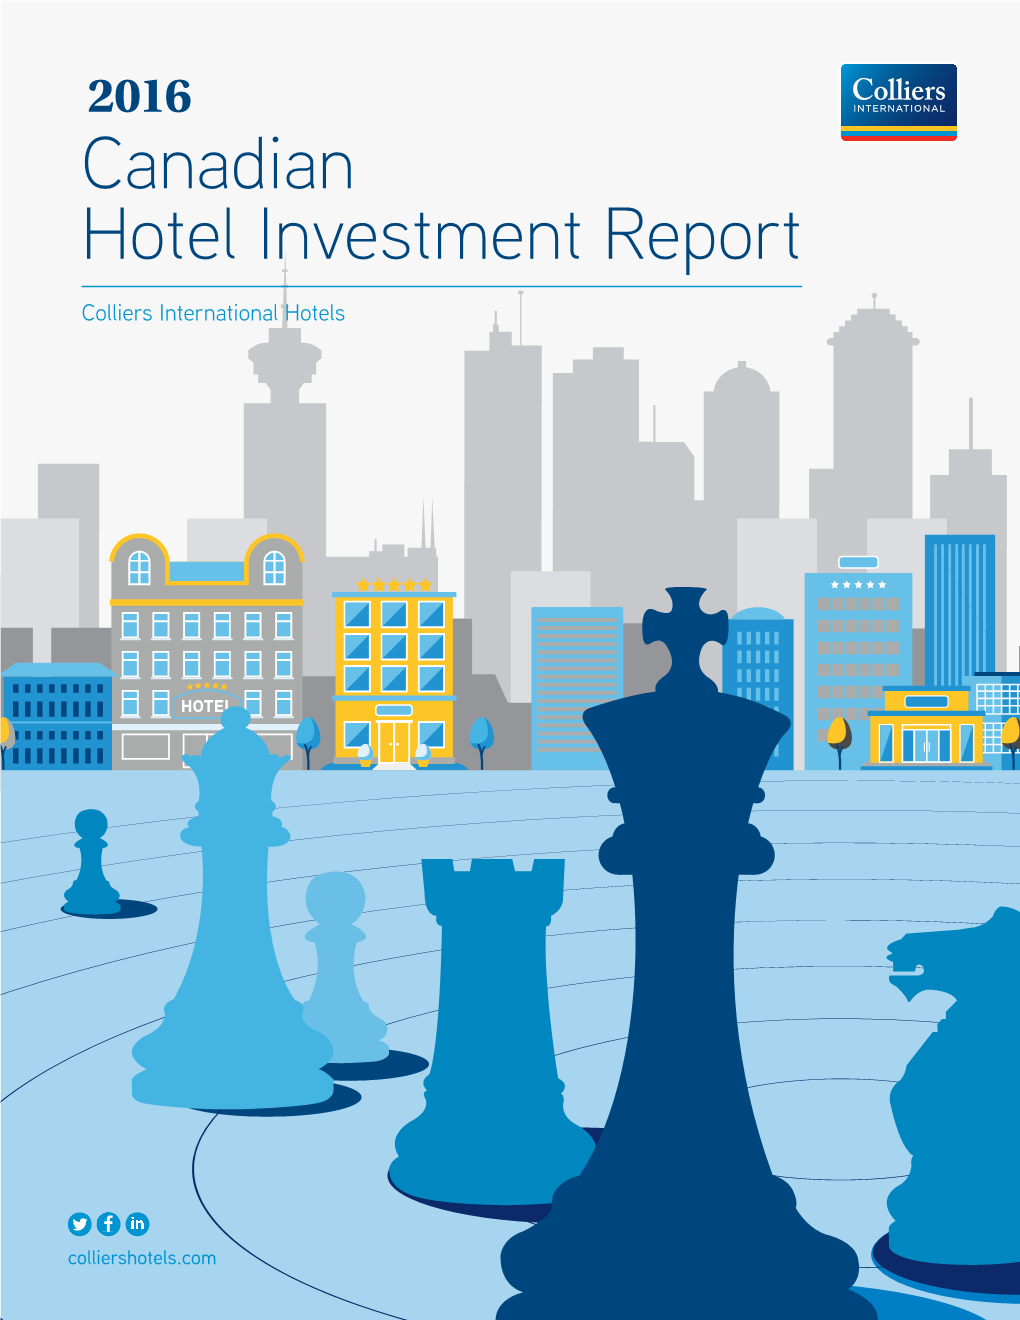 Canadian Hotel Investment Report